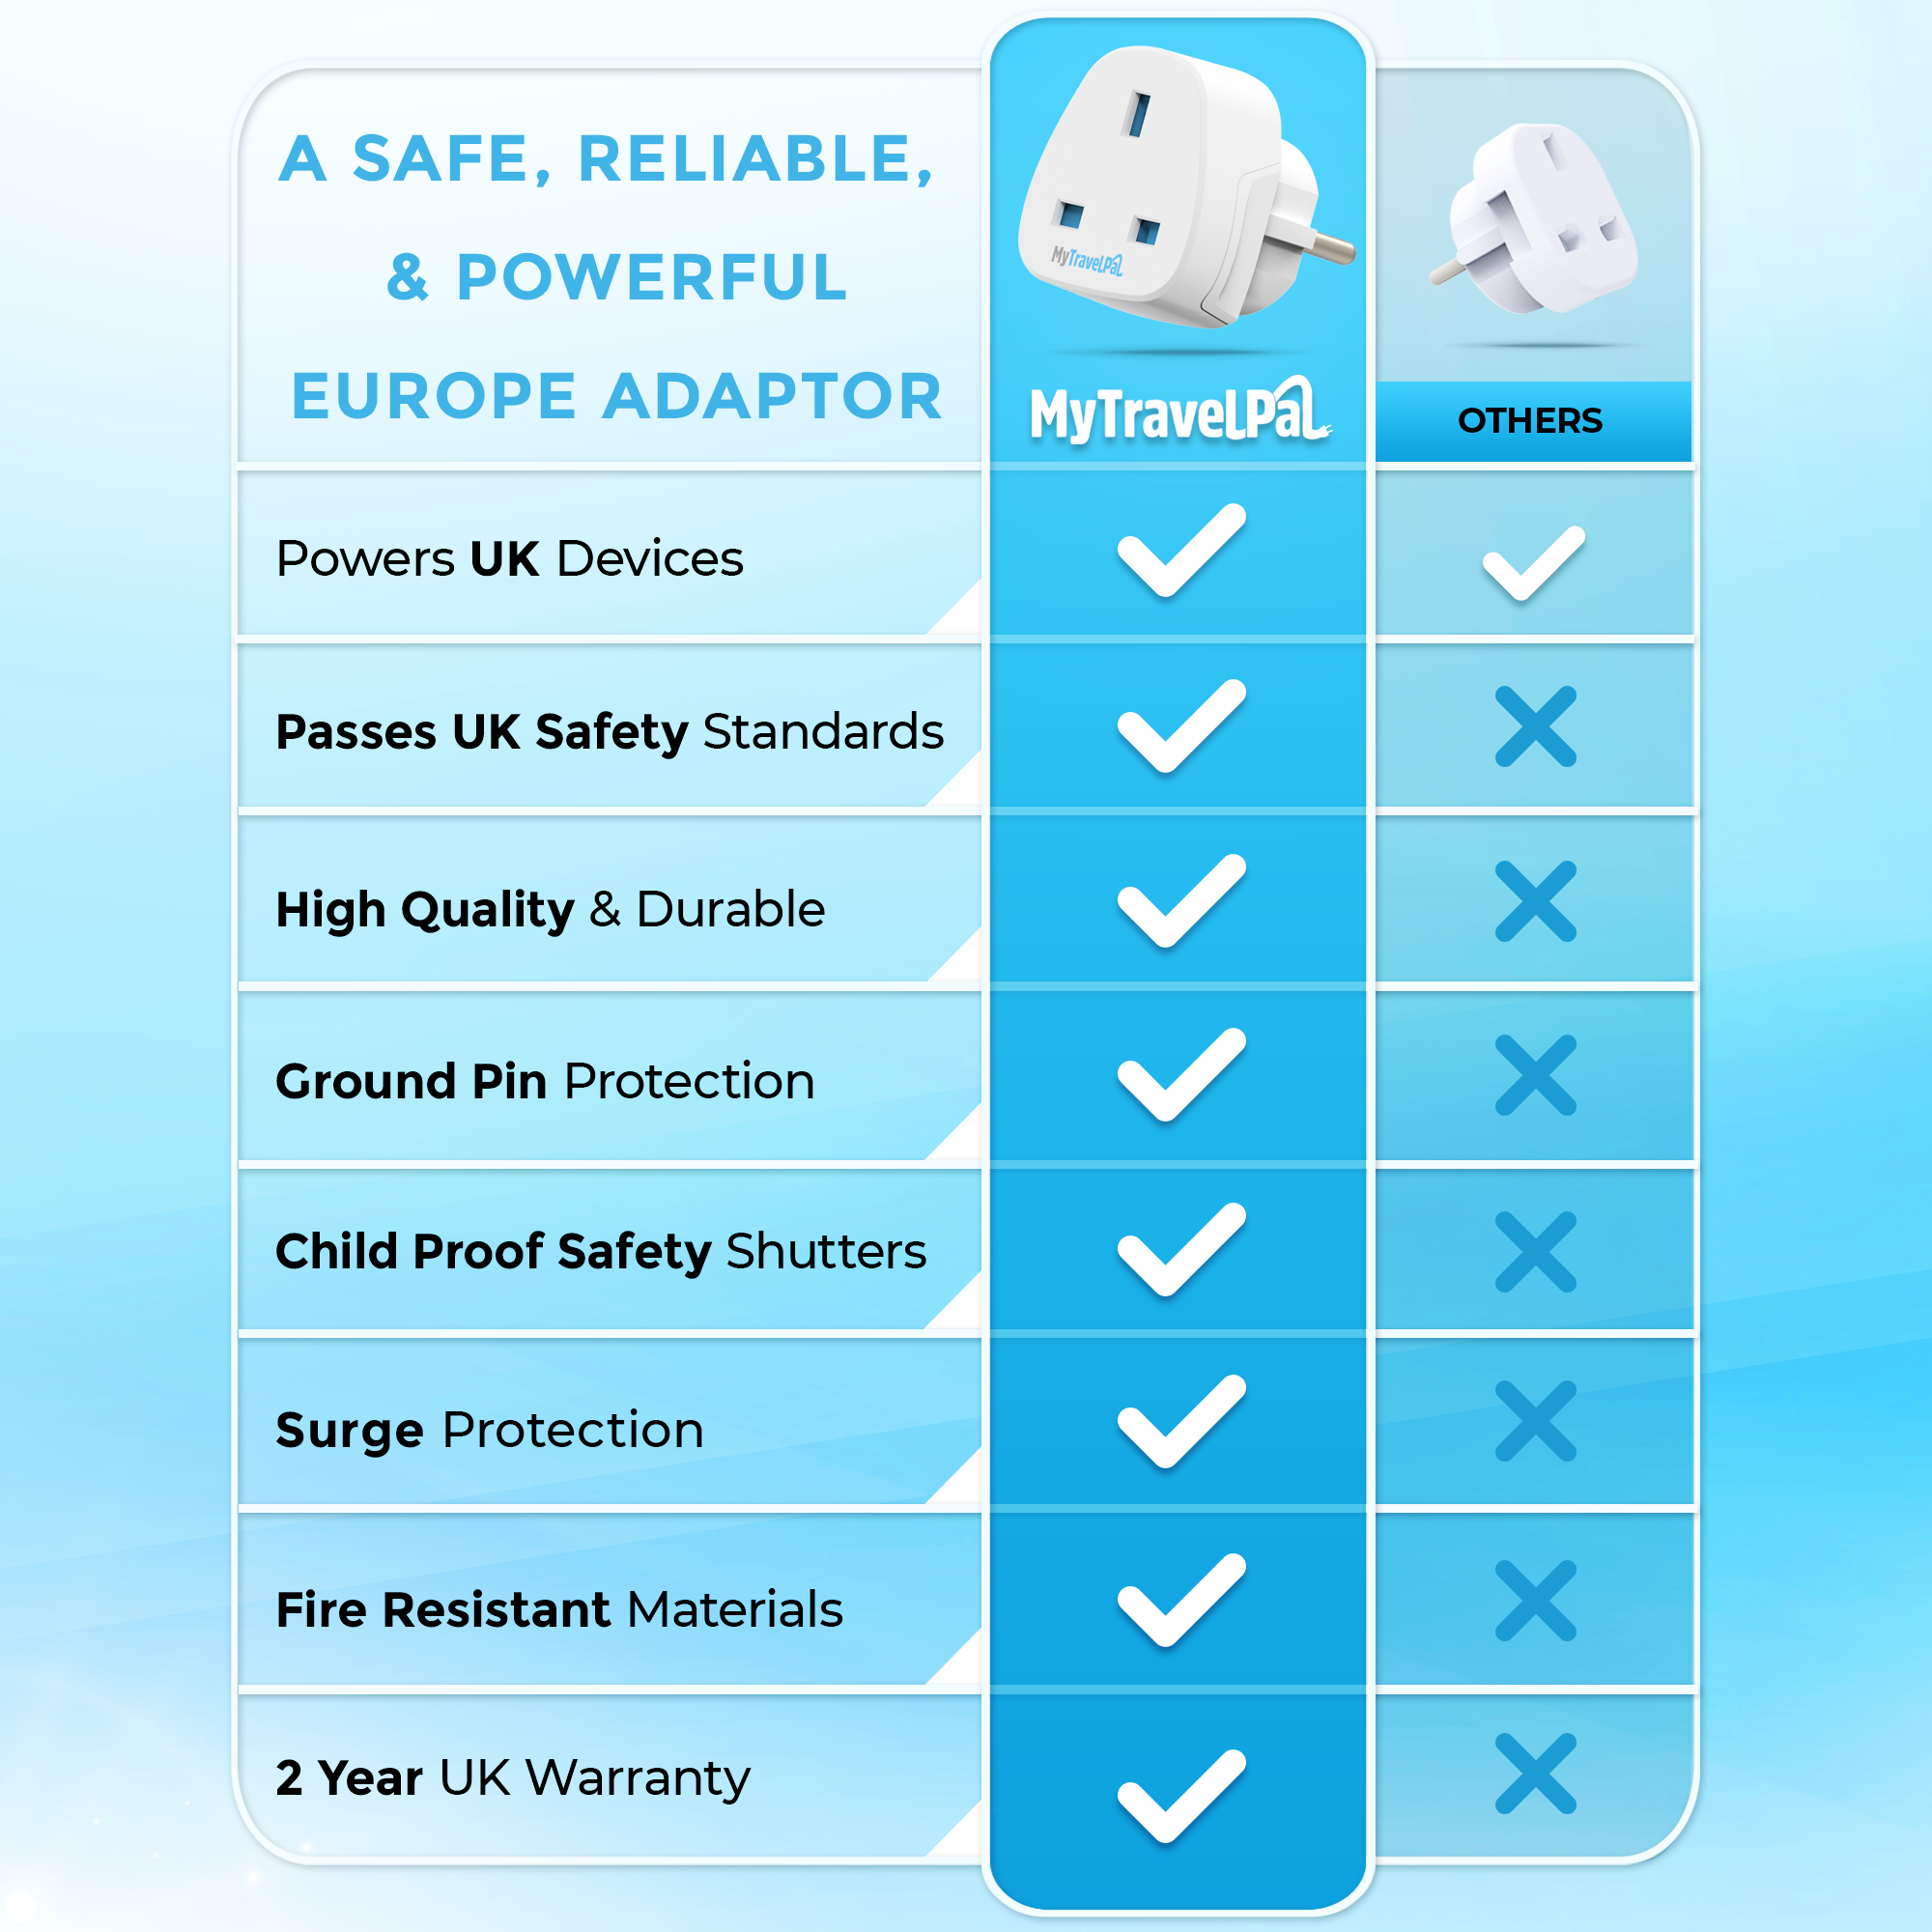 UK To European Adapter - 2 Pack (Type E / F)